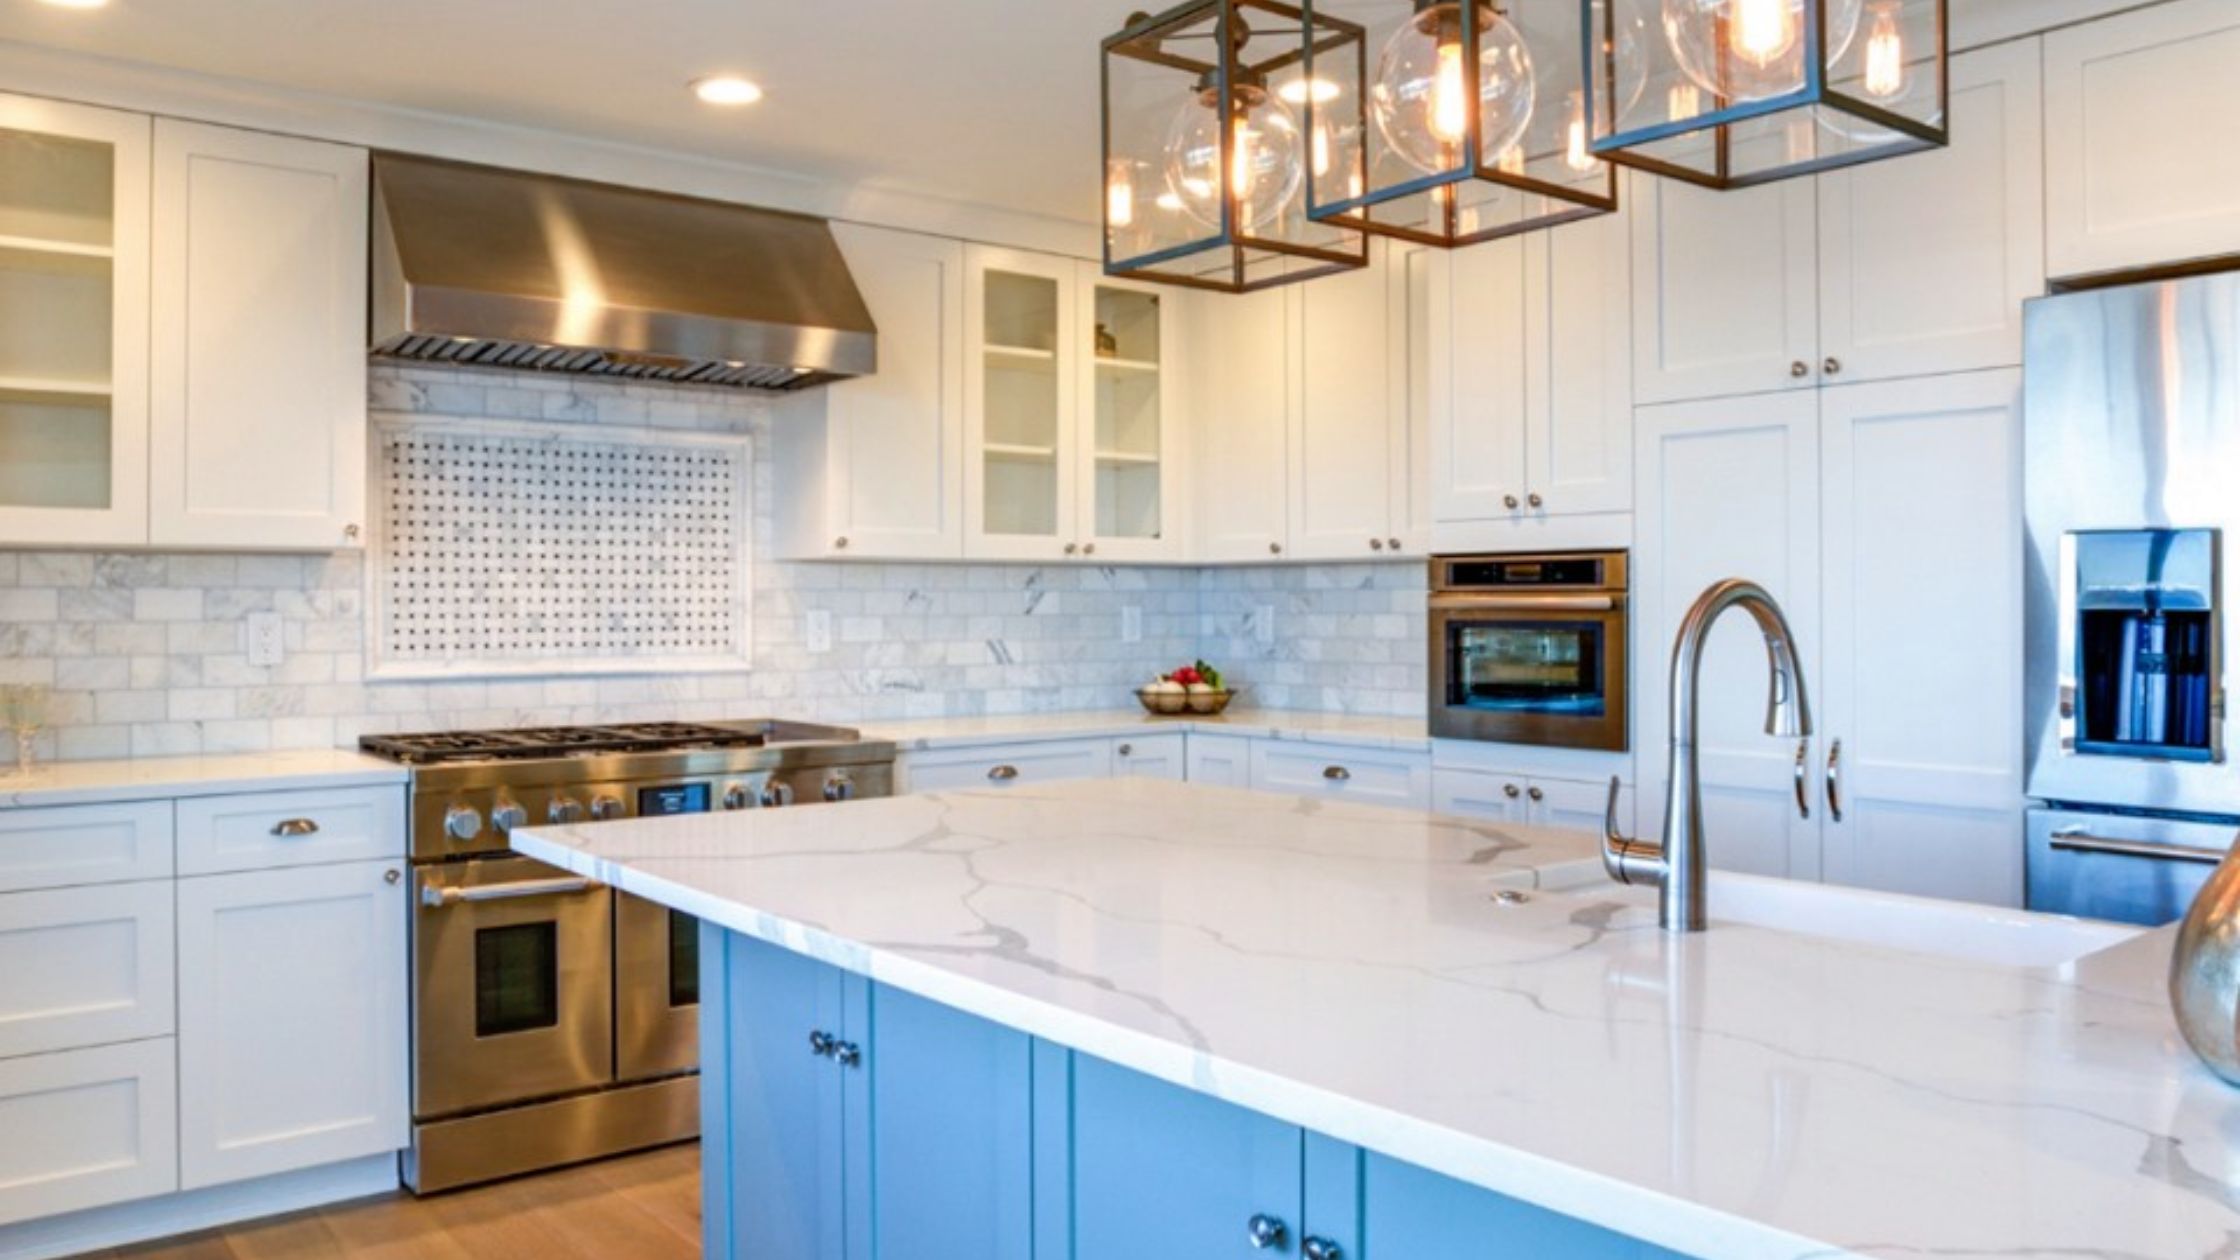 How Much Does a Kitchen Remodel Cost in Central Illinois?